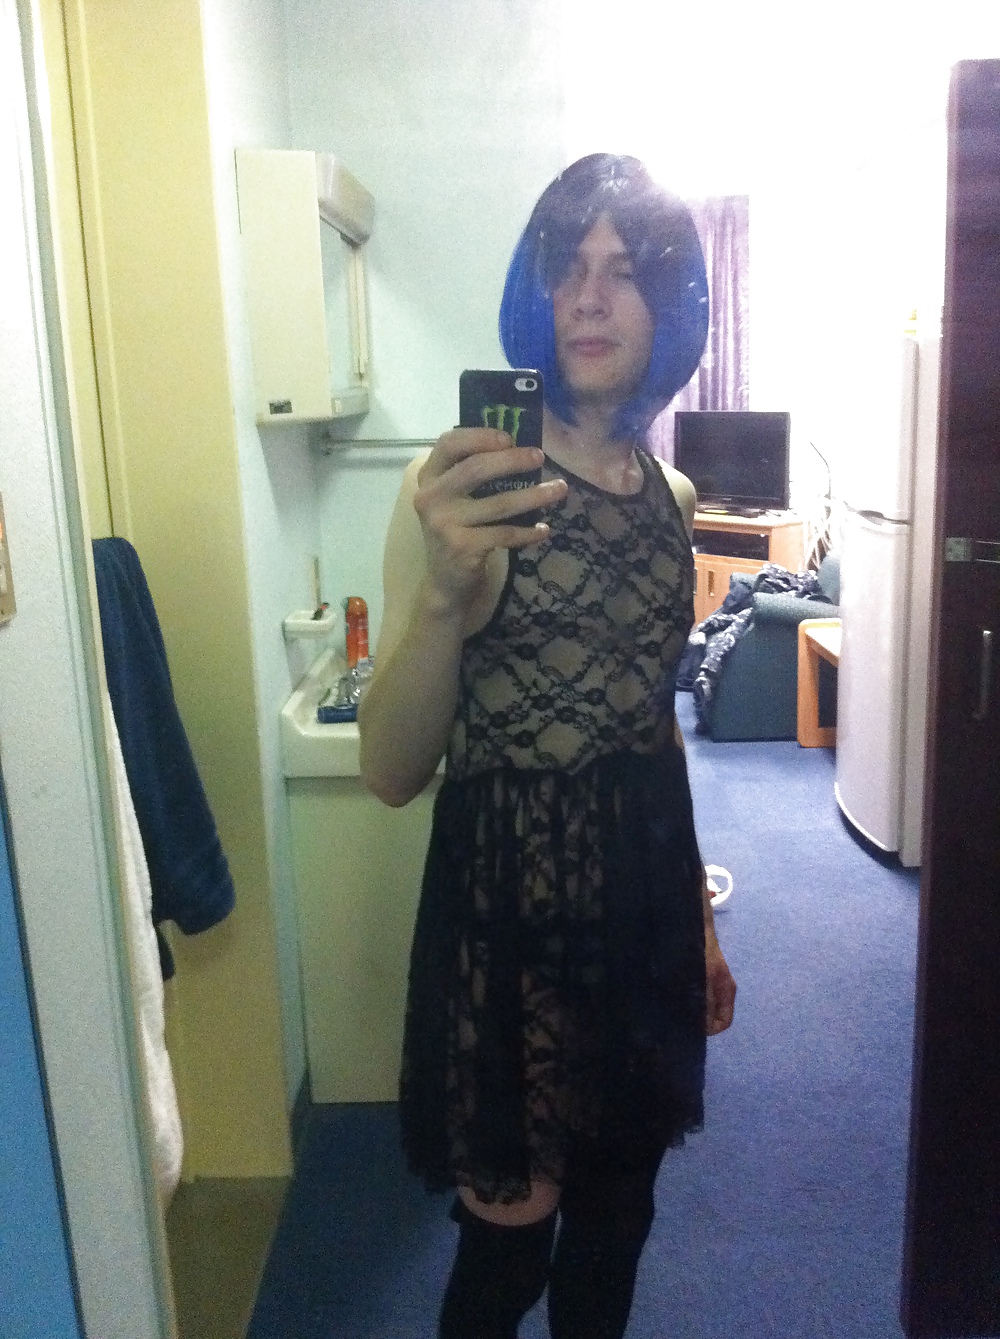 New wig and dress